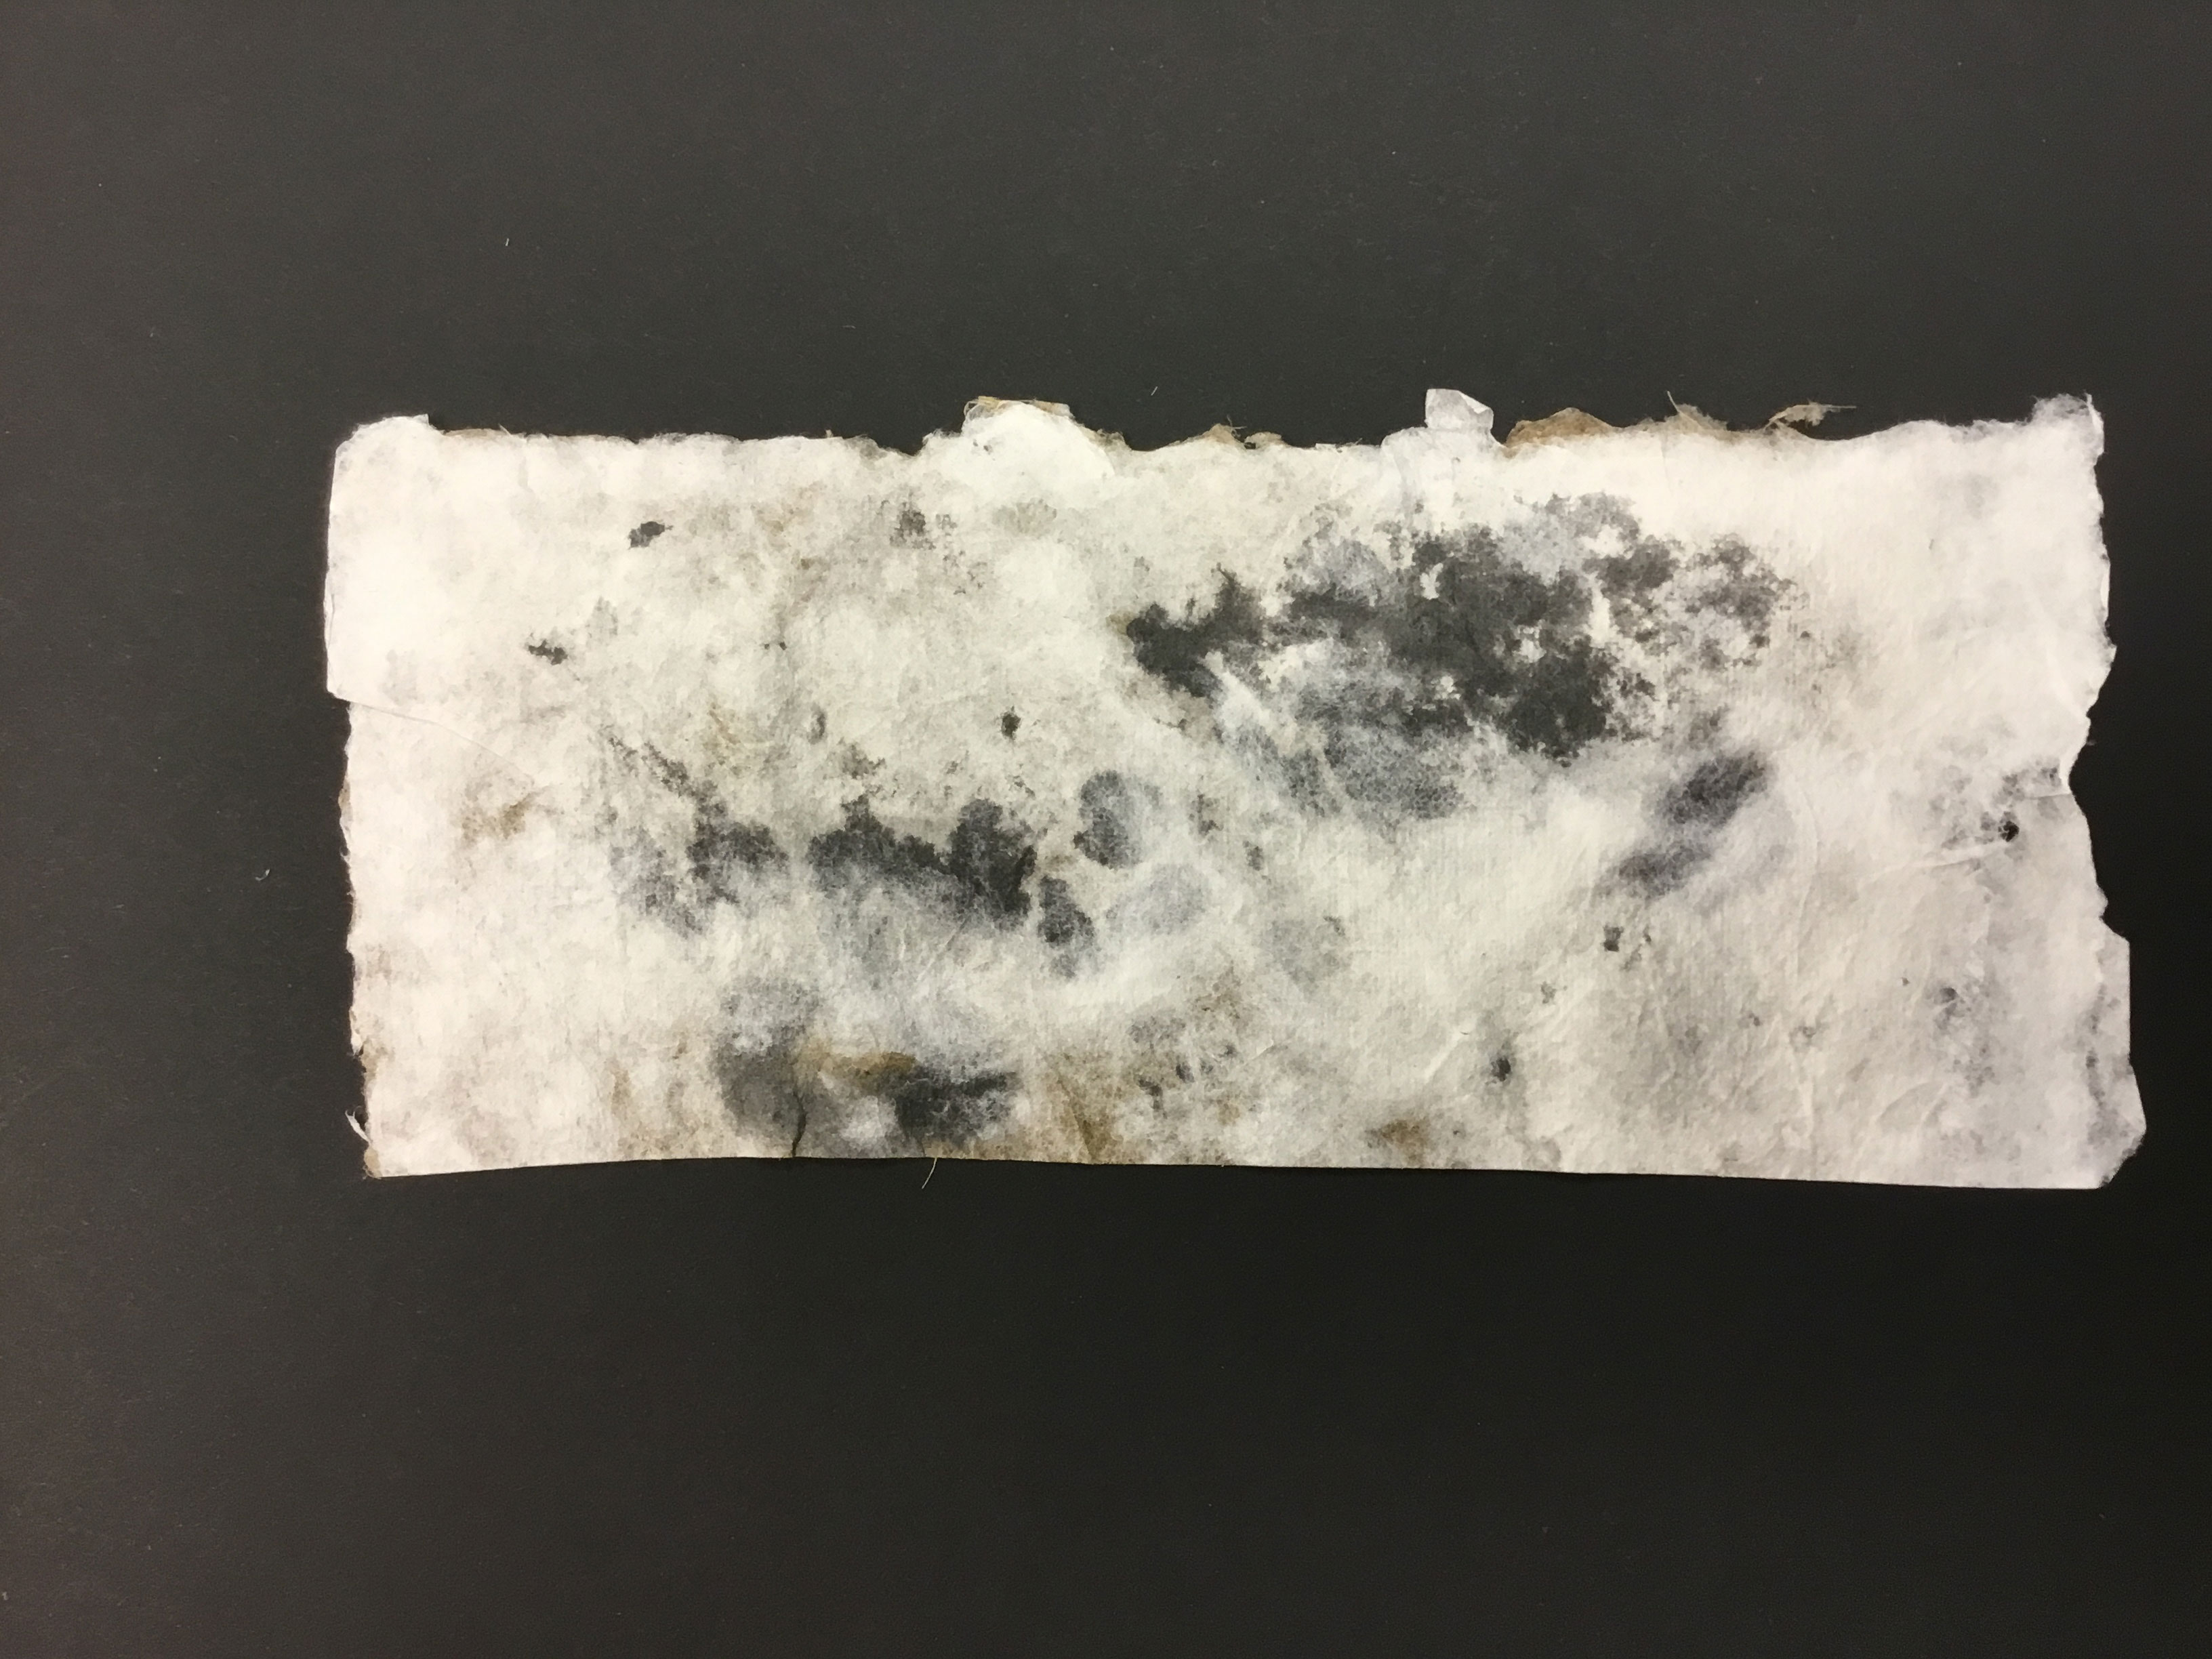 This piece, entitled “Makeshift (On Getting By)”, is a horizontally-oriented rectangular piece of handmade paper made from pulp paint, recycled bedsheet, and garden waste. The piece is black and white, with a crater-like landscape painted on the front. The back of the piece is brown with straw-like pulp.